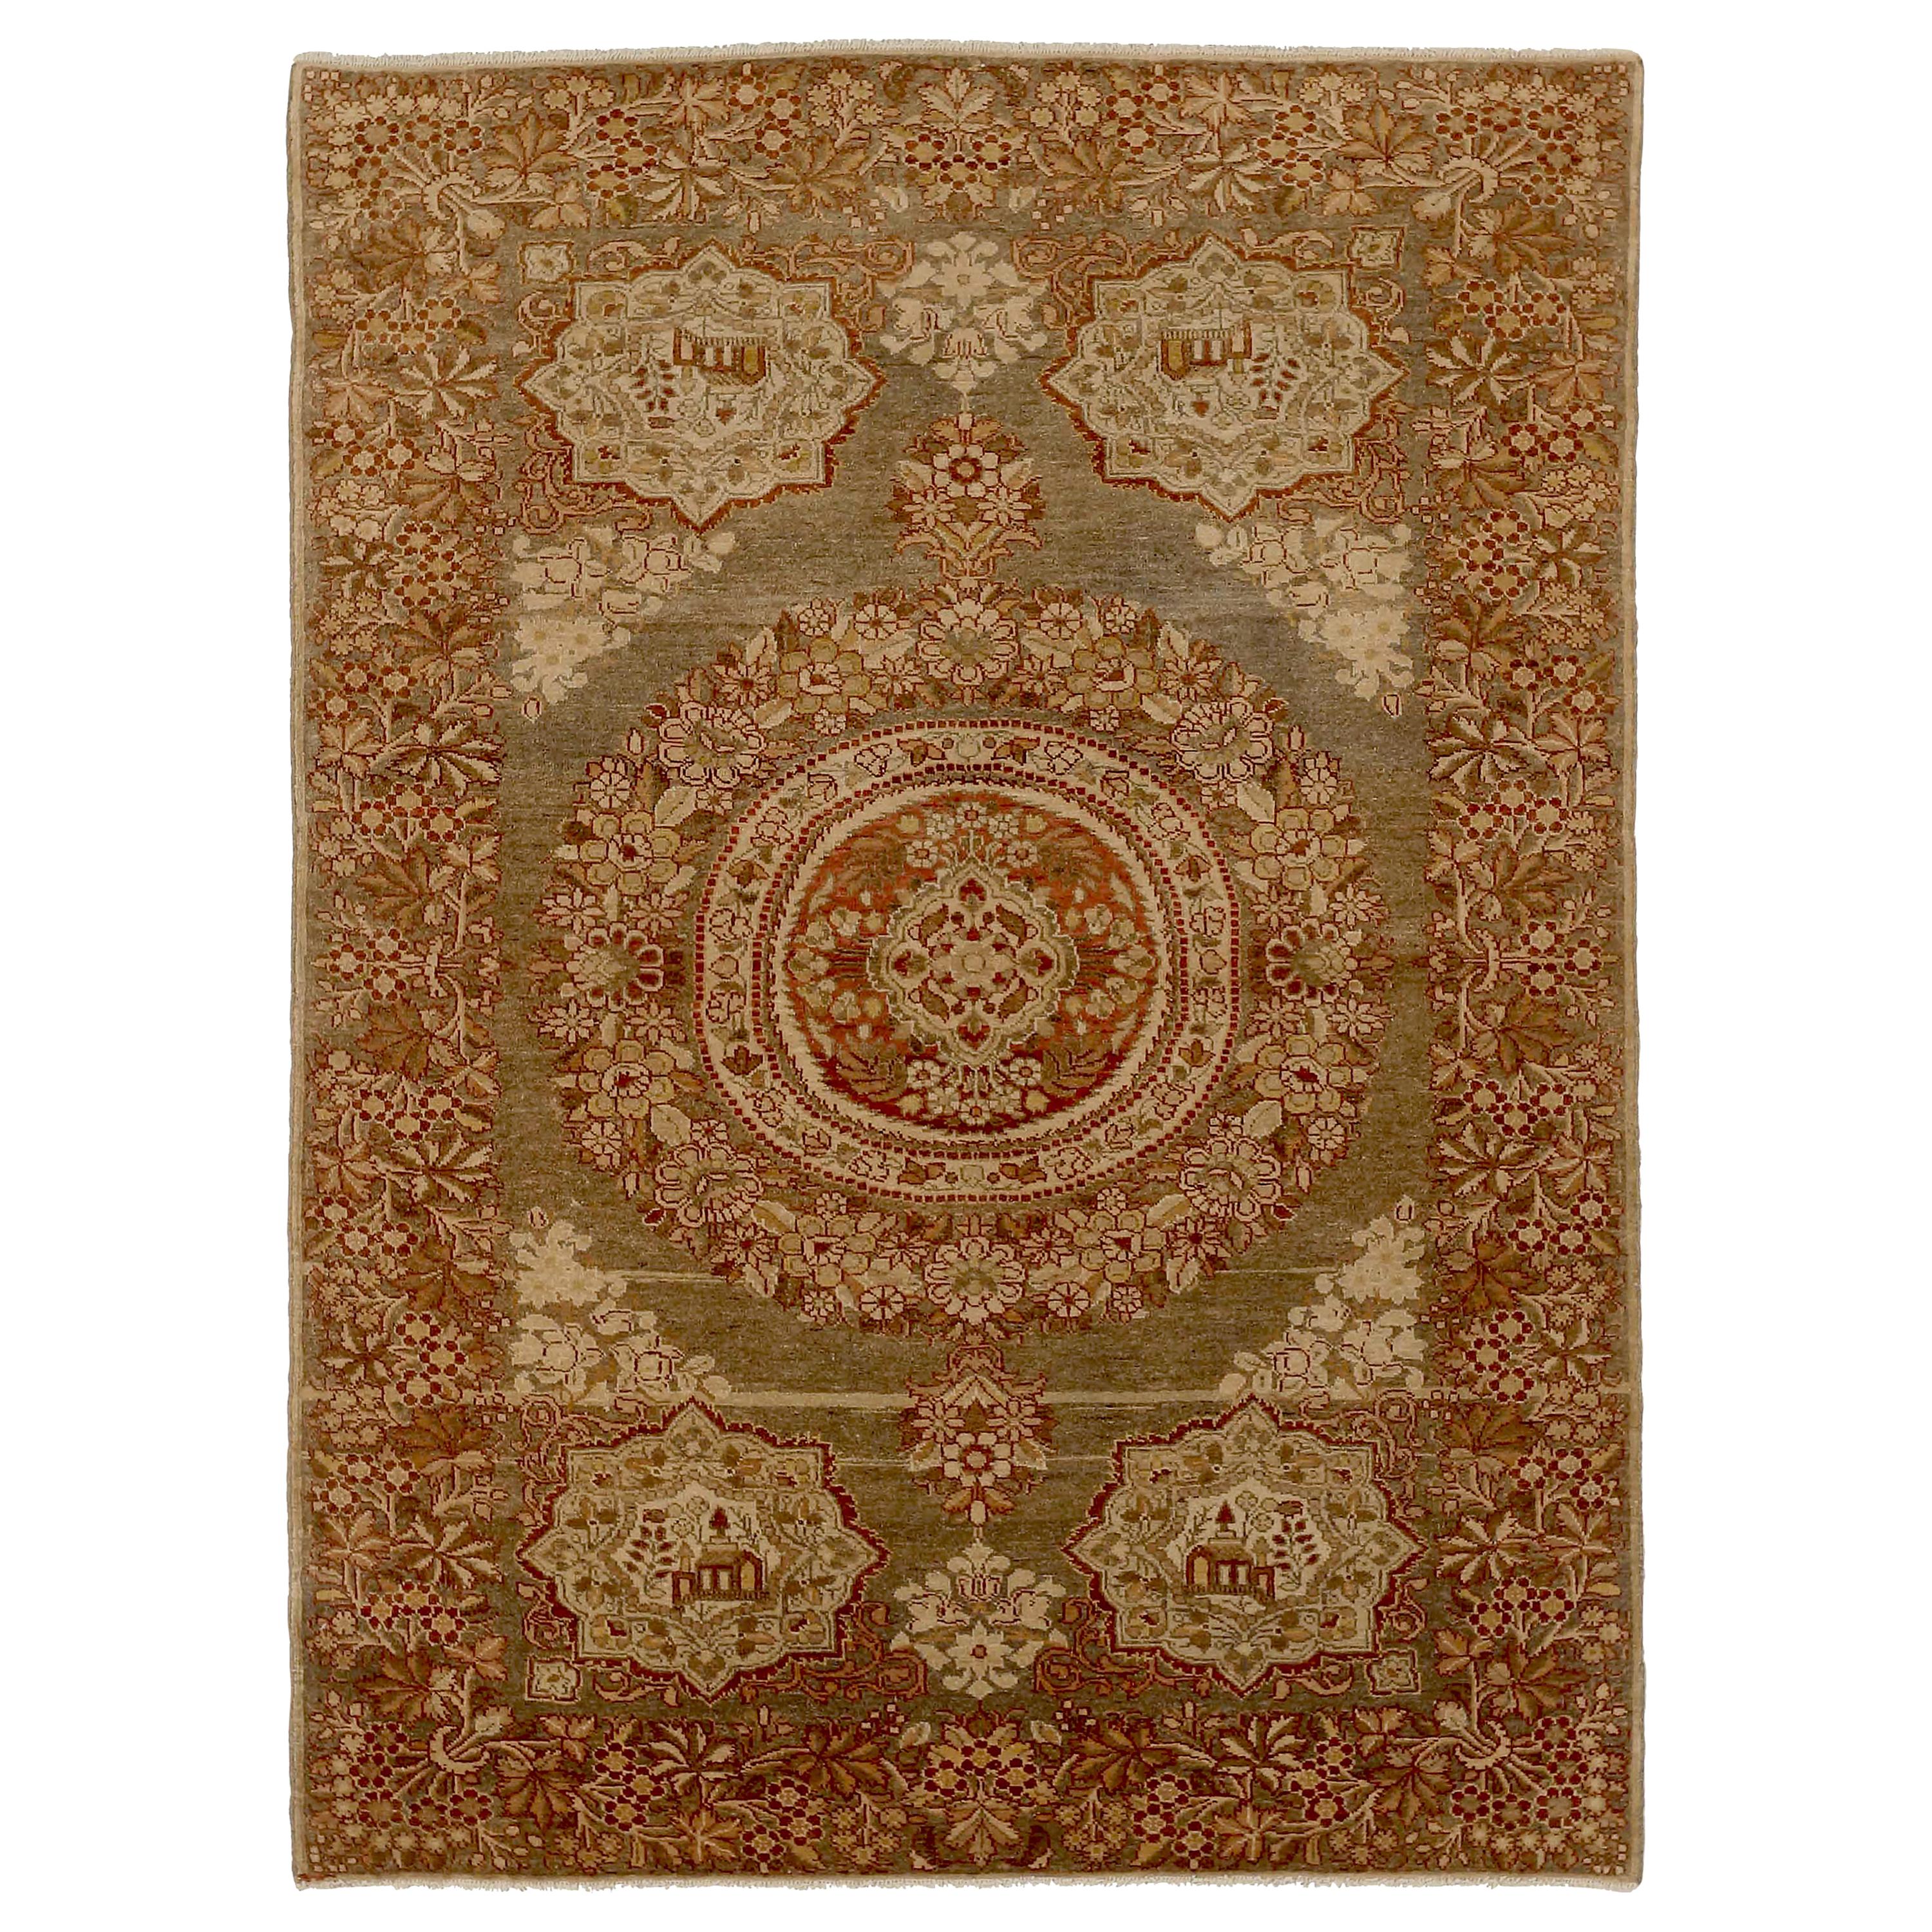 Antique Persian Malayer Rug with Brown and Beige Floral Patterns on Ivory Field For Sale